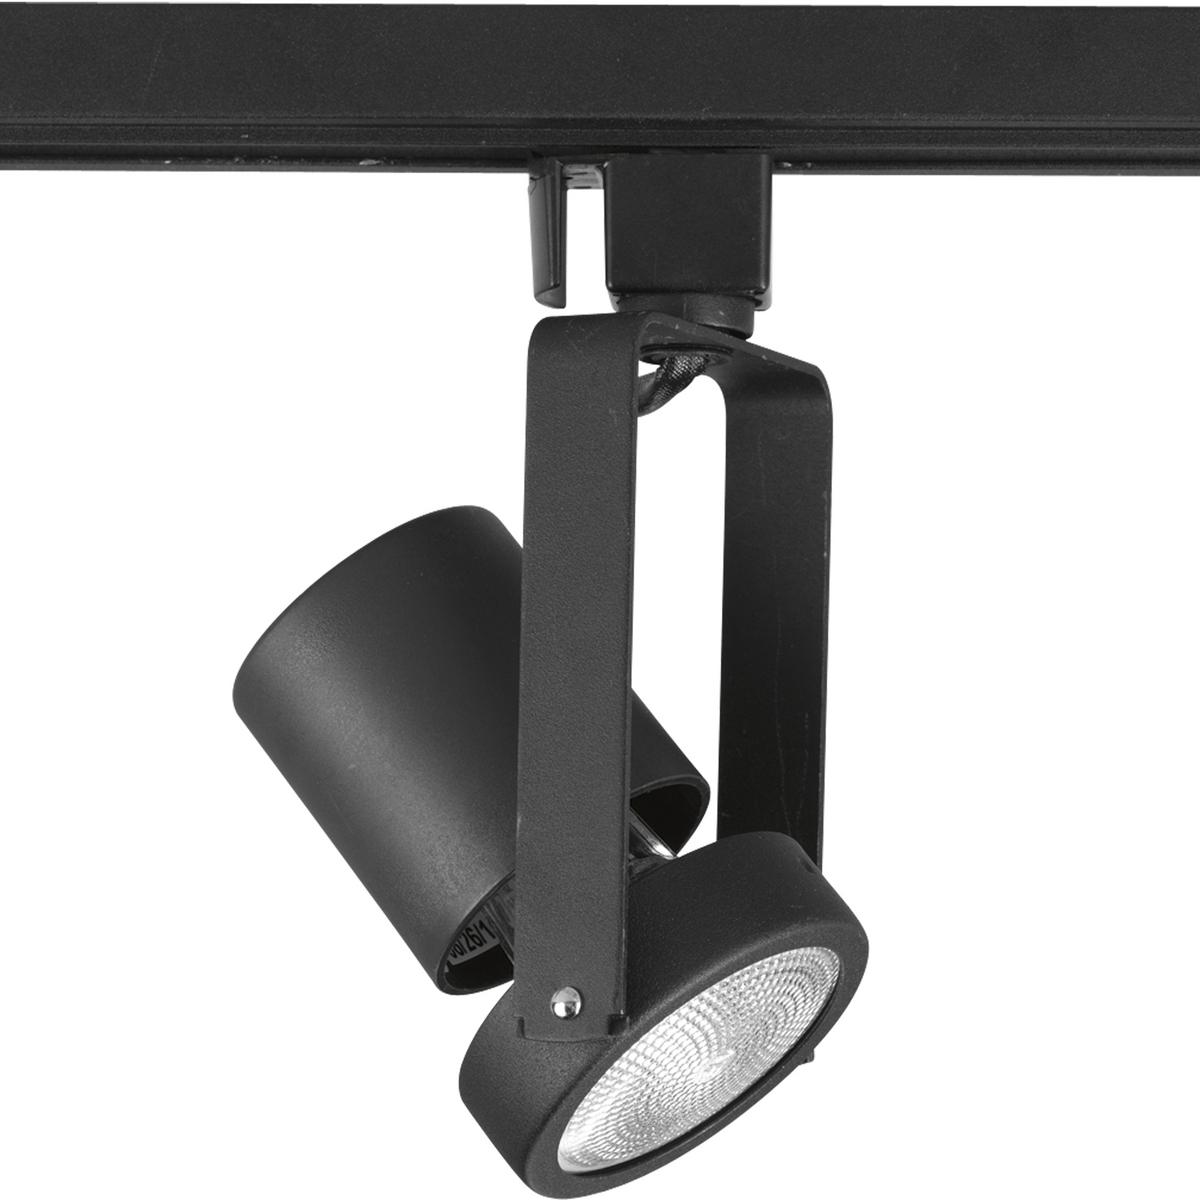 Hubbell P6326-31 Black high tech Alpha Trak track head with 360 degree horizontal rotation and 90 degree vertical rotation. Heads can be easily repositioned on the track to provide lighting in different areas of the room. Excellent for both residential and retail location